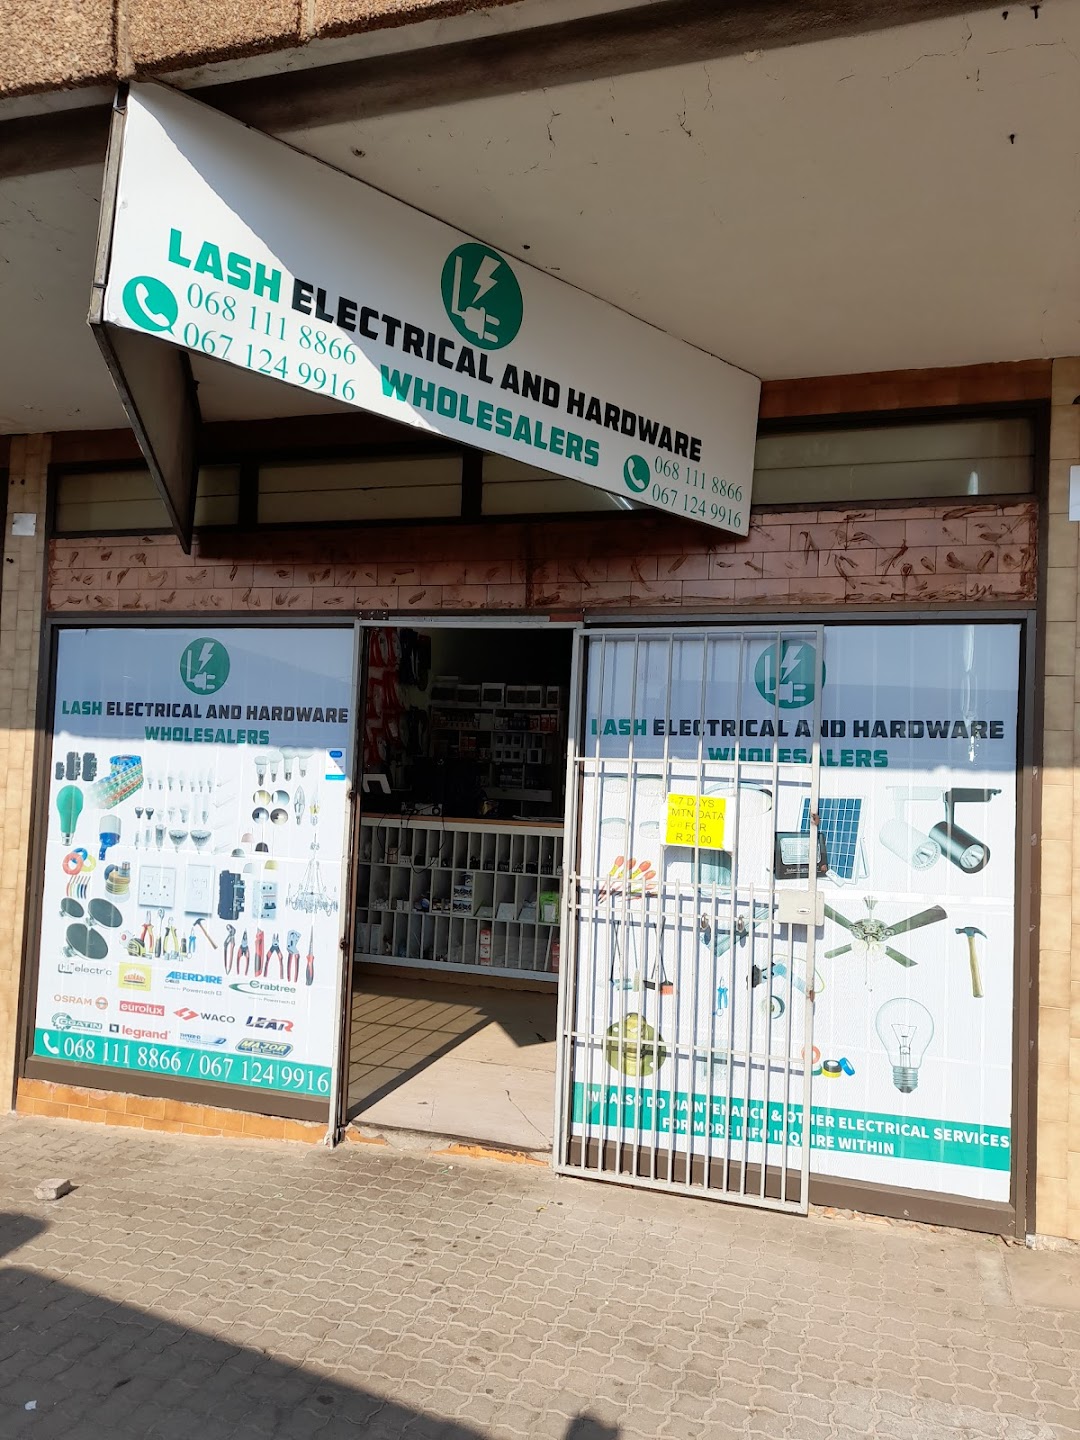 Lash Electrical and Hardware Wholesalers